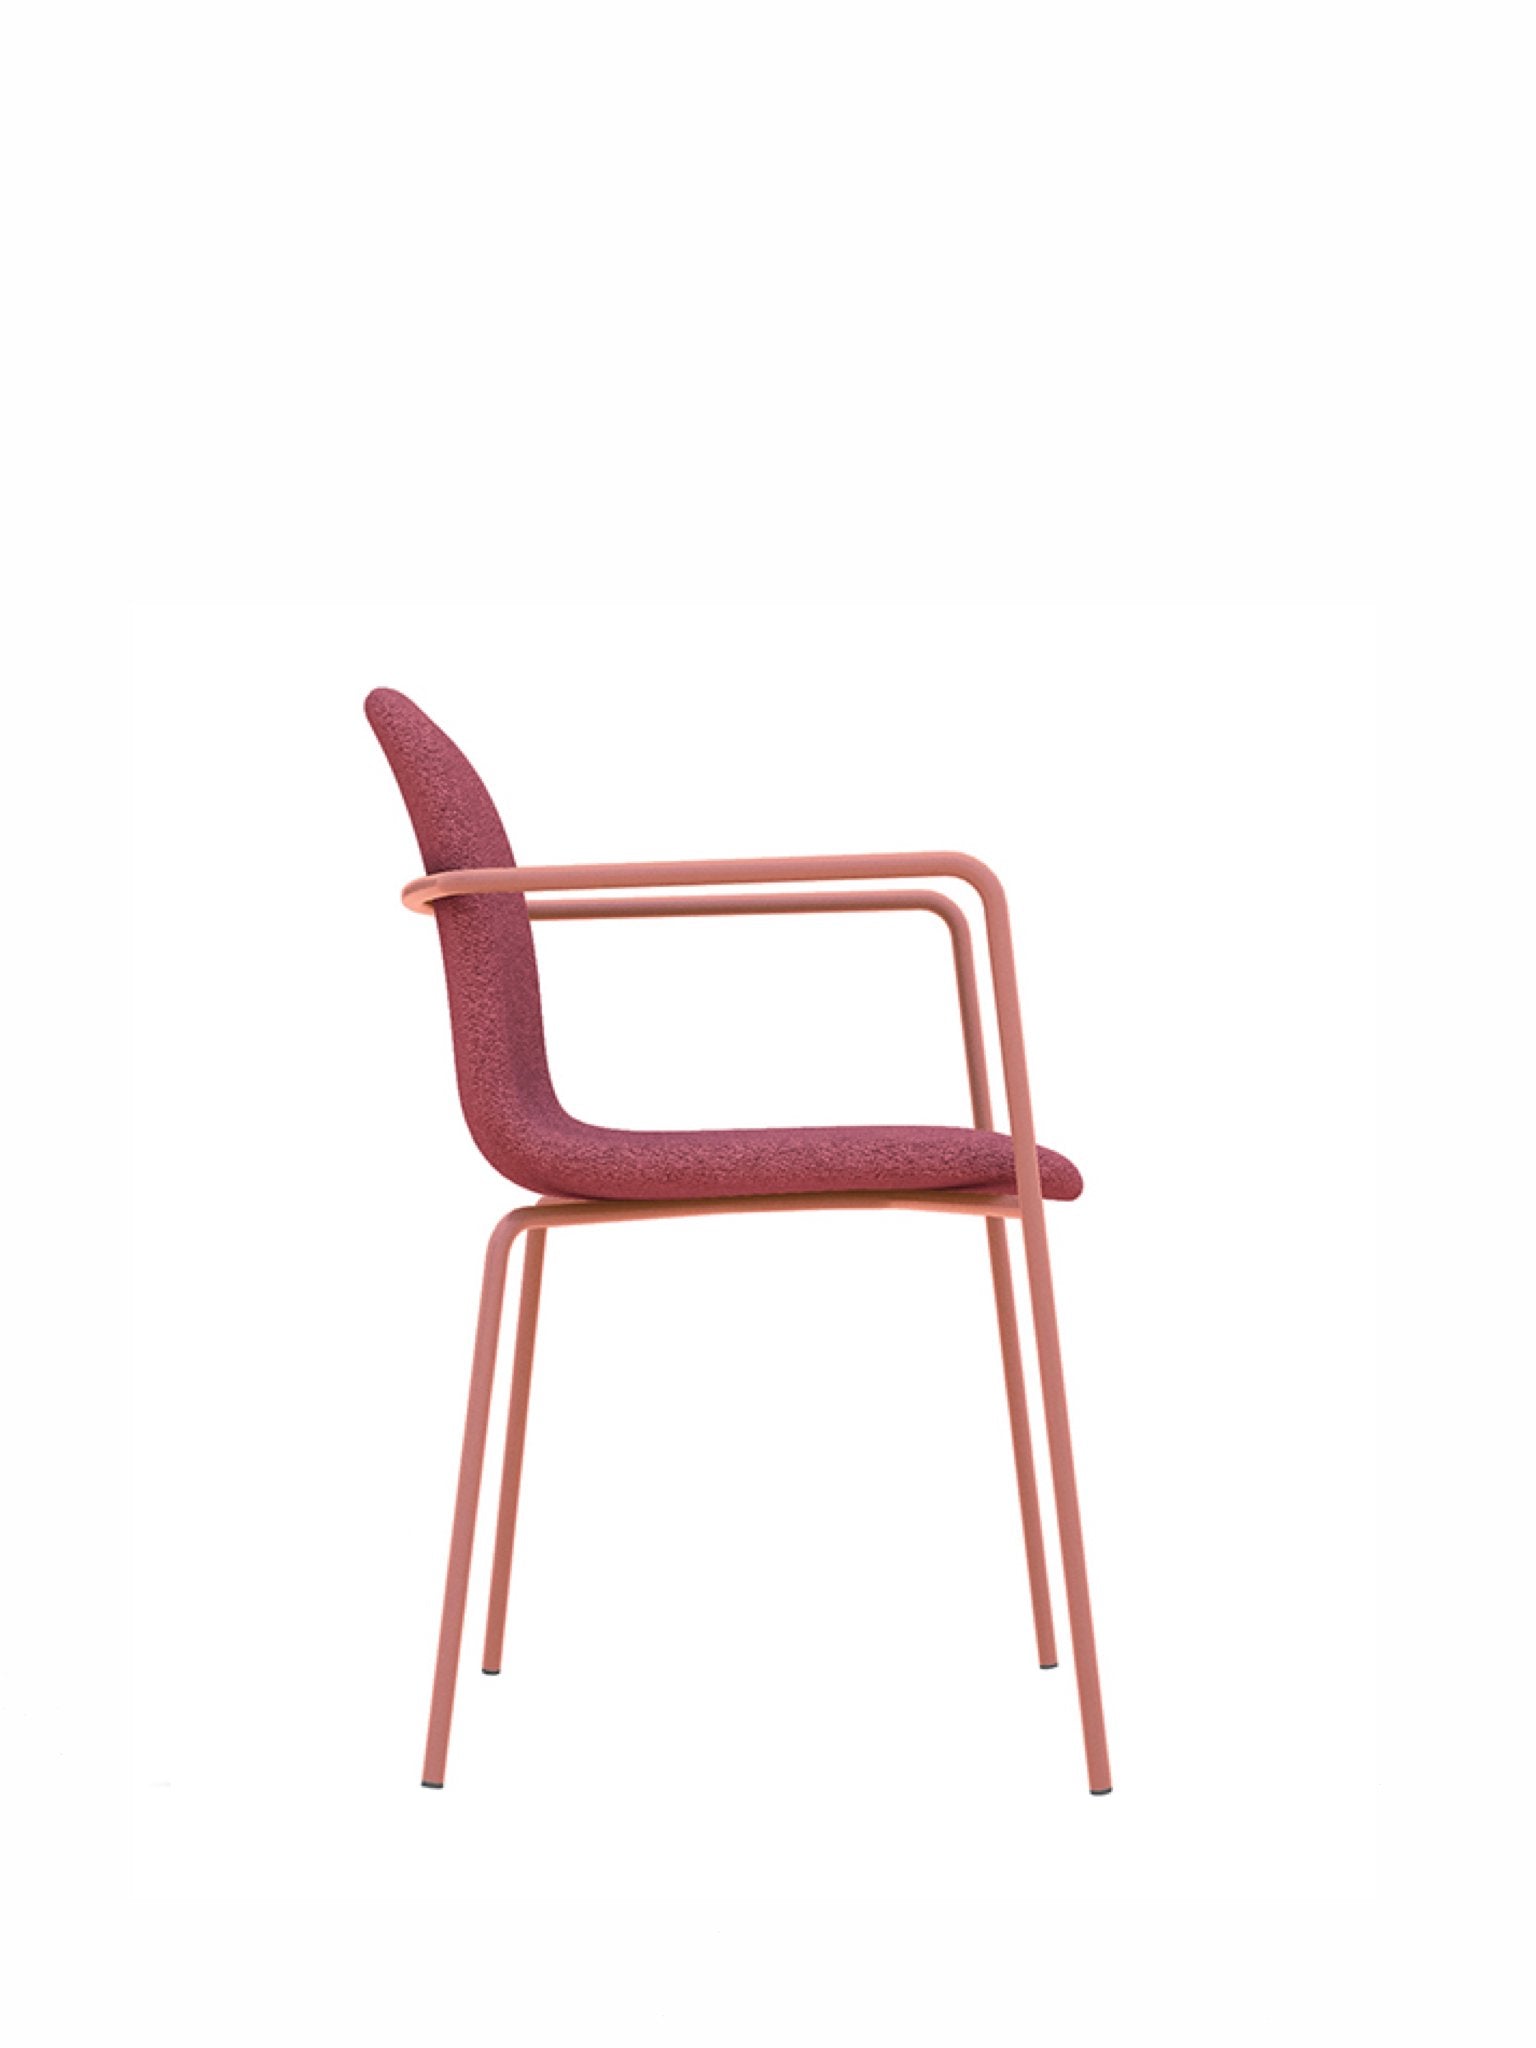 Bacco Slim Armchair-Job's-Contract Furniture Store